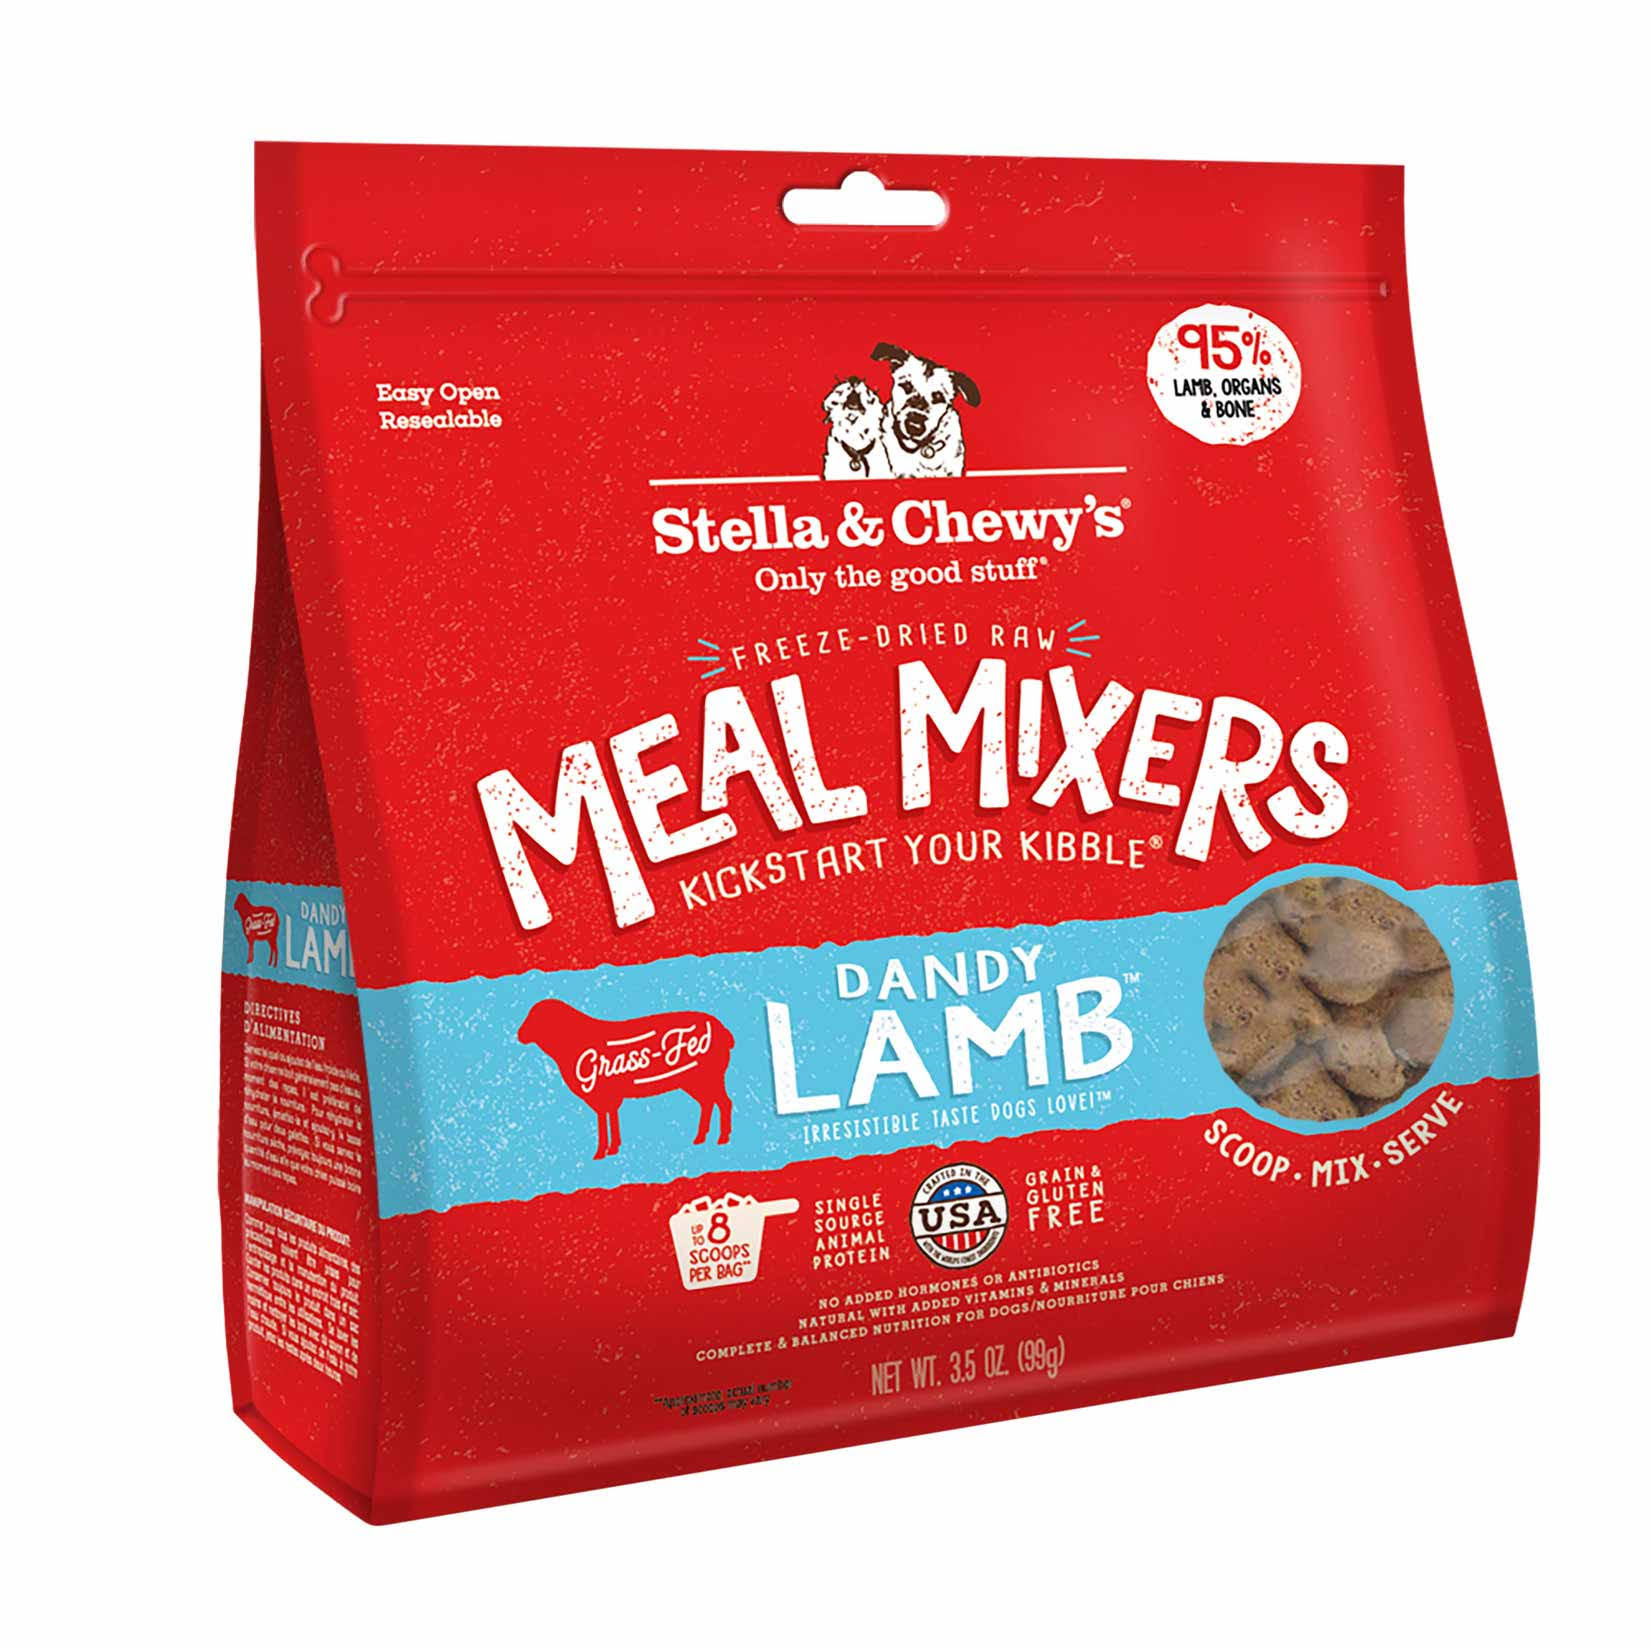 Stella & Chewy's Dandy Lamb Freeze Dried Meal Mixers 3.5 oz | Dog Food